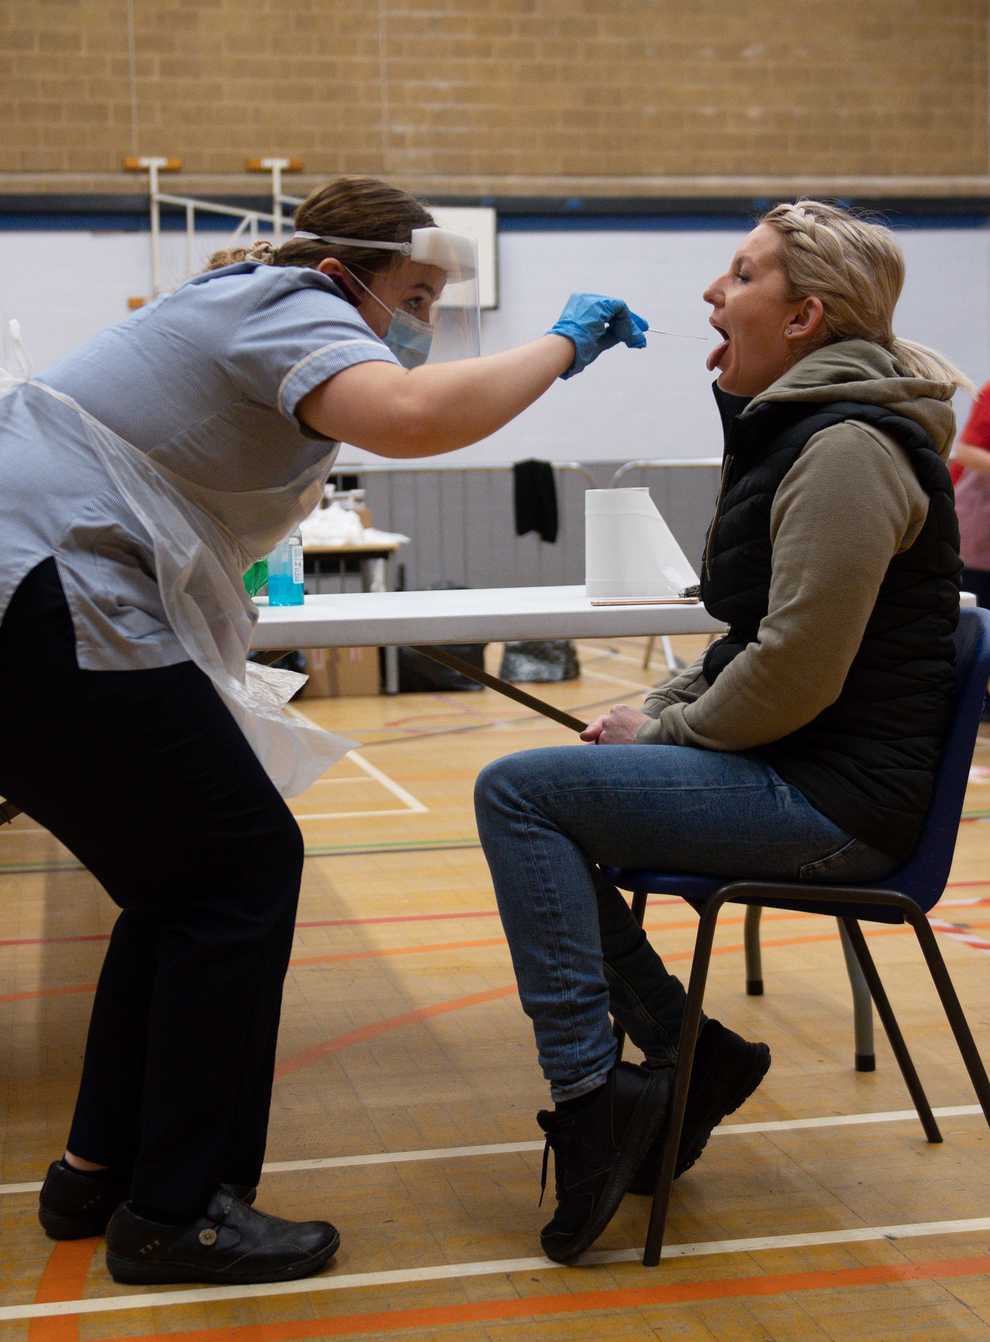 A nurse administers a test at Dimensions Leisure Centre in Stoke-on-Trent (Jacob King/PA)